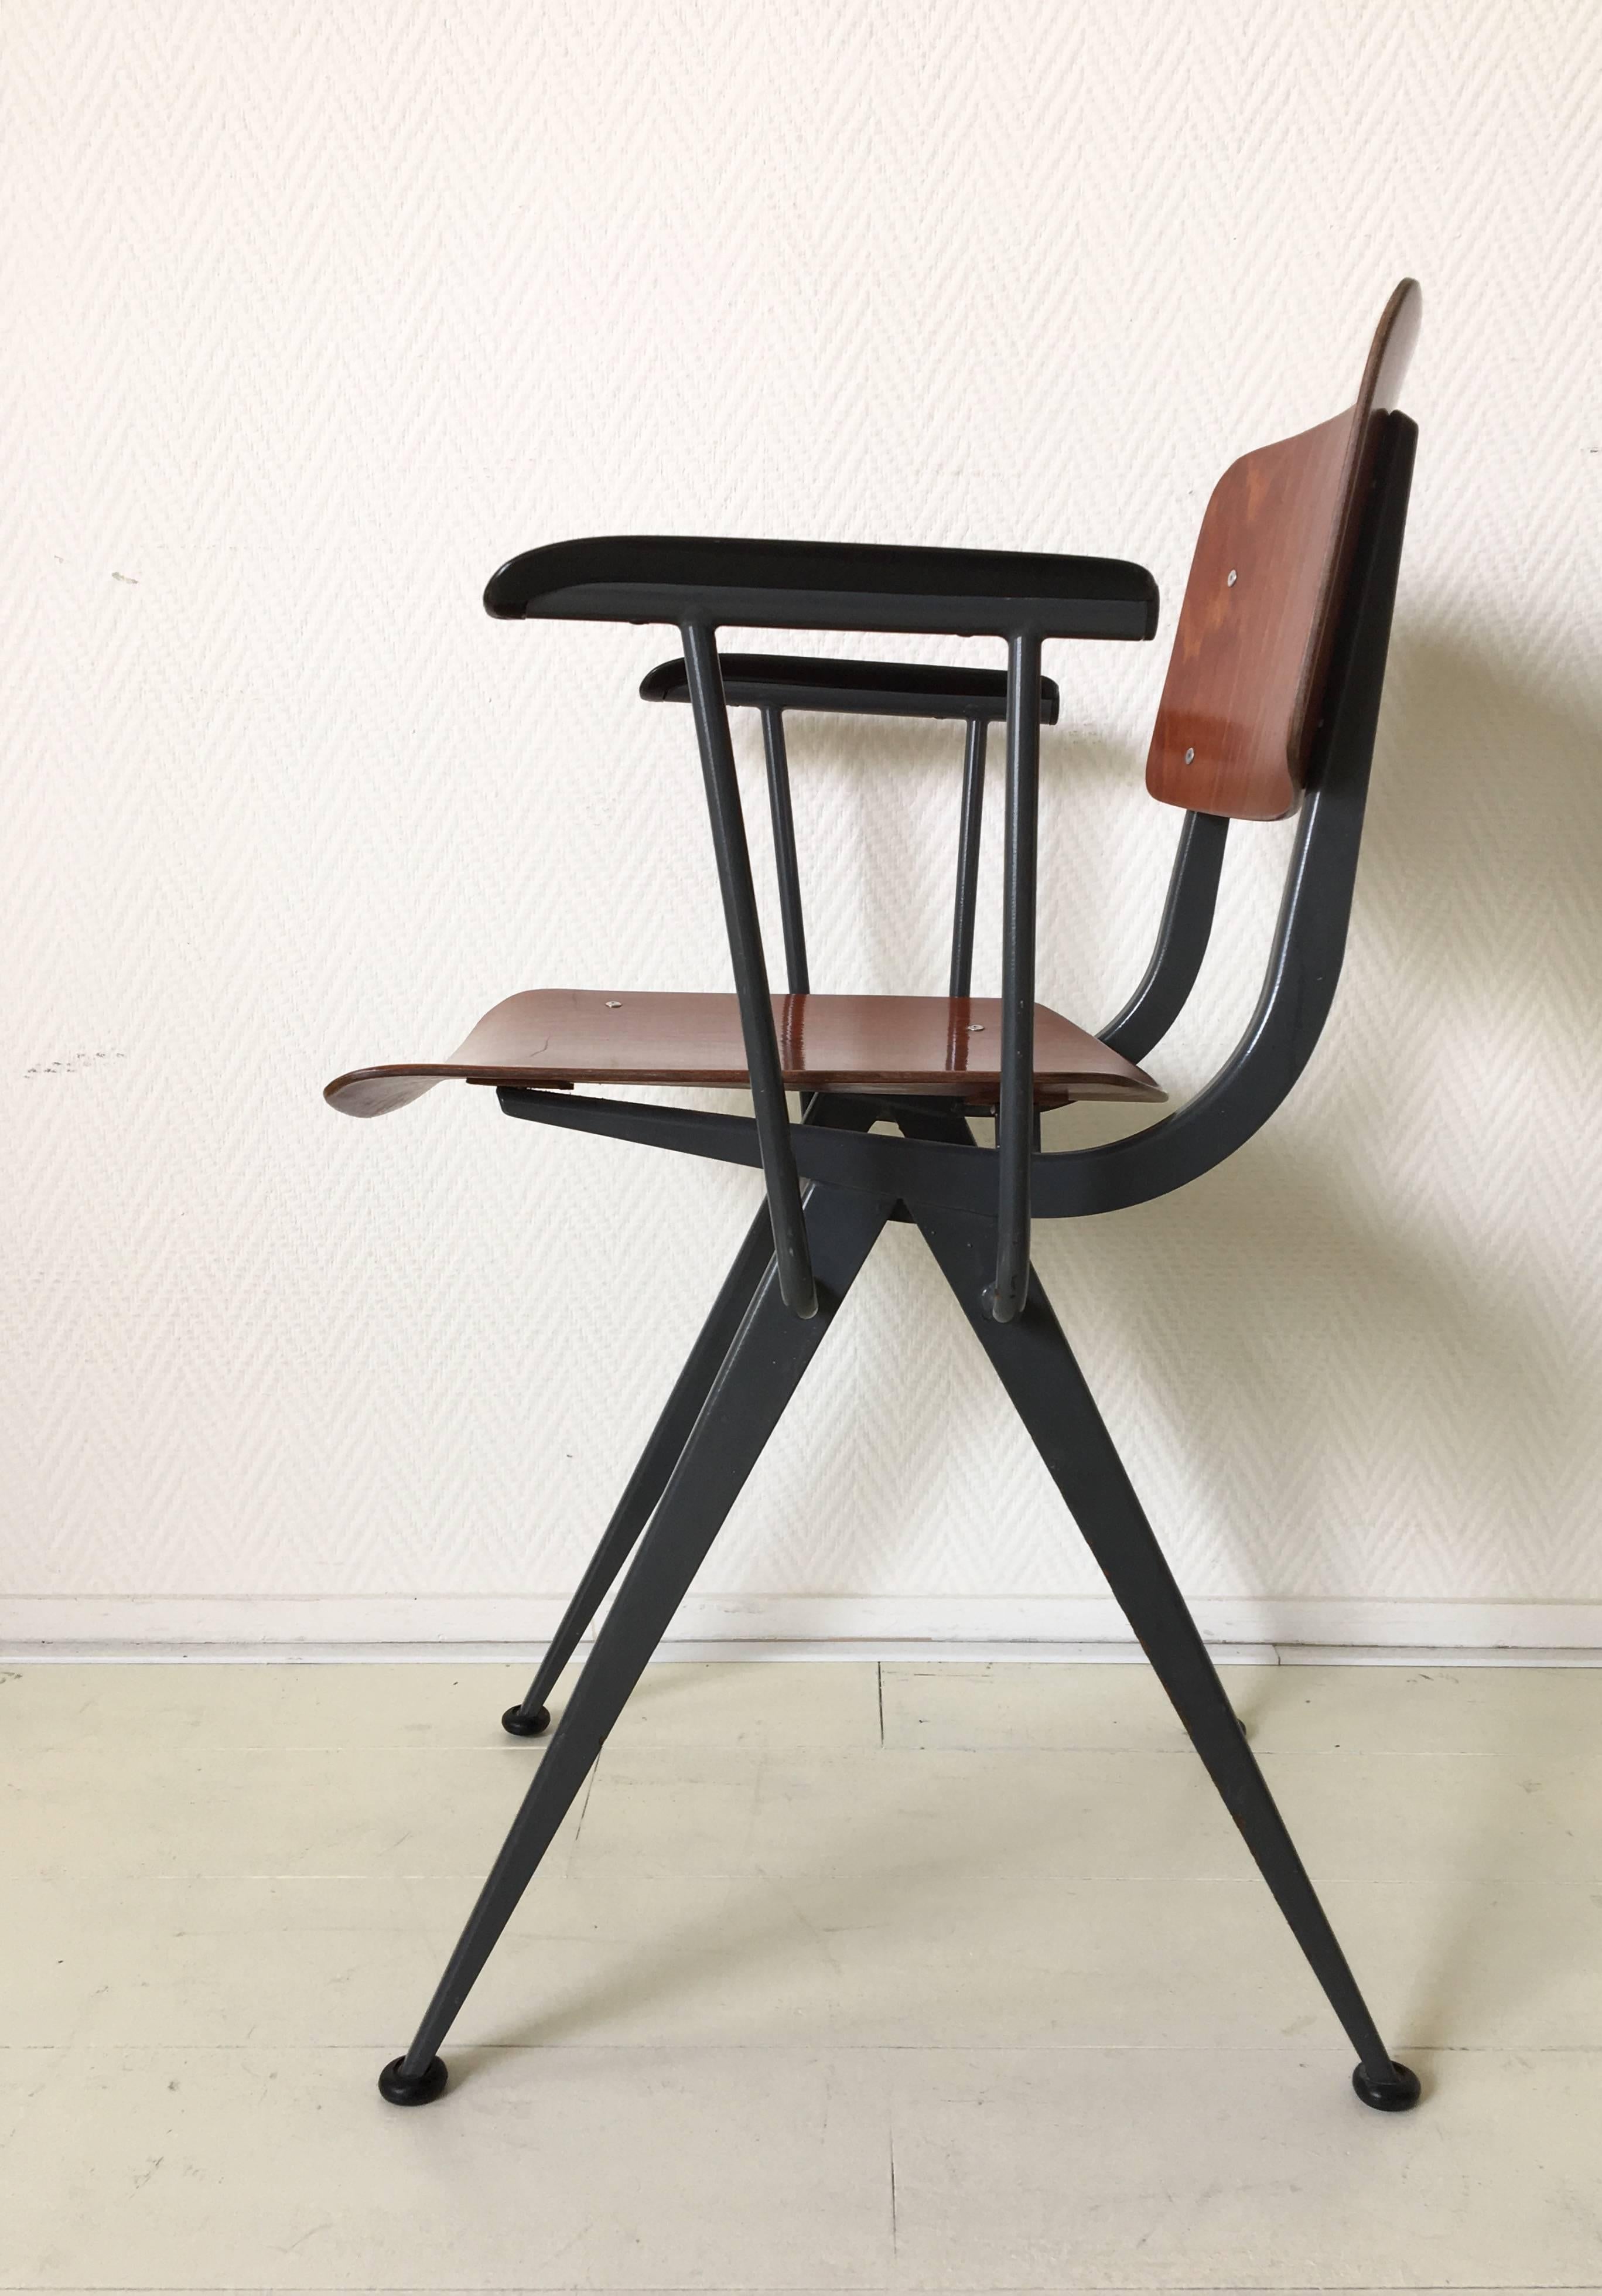 Dutch Midcentury Prouvé Inspired Industrial Armchair Attributed to Friso Kramer For Sale